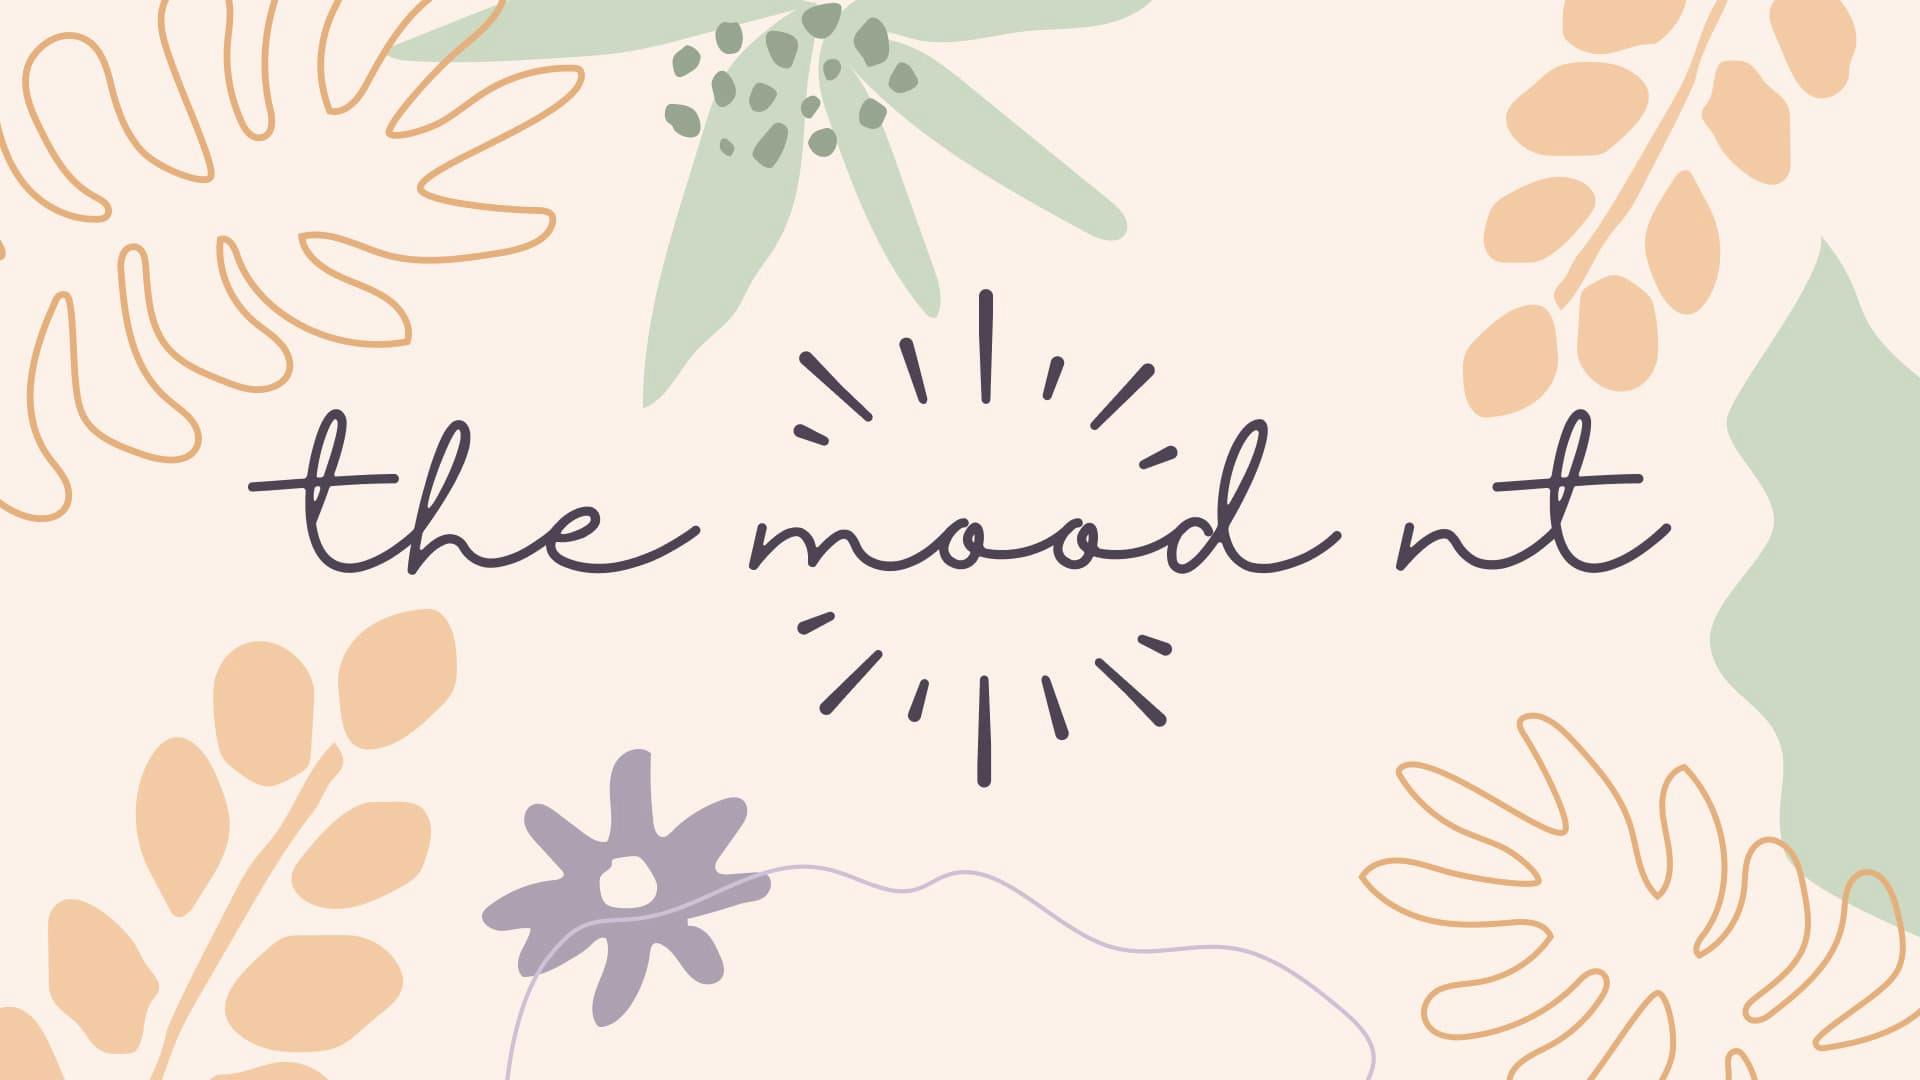 Image of the homepage of the mood nutritional therapy, the logo sits in a field of plant like graphics.